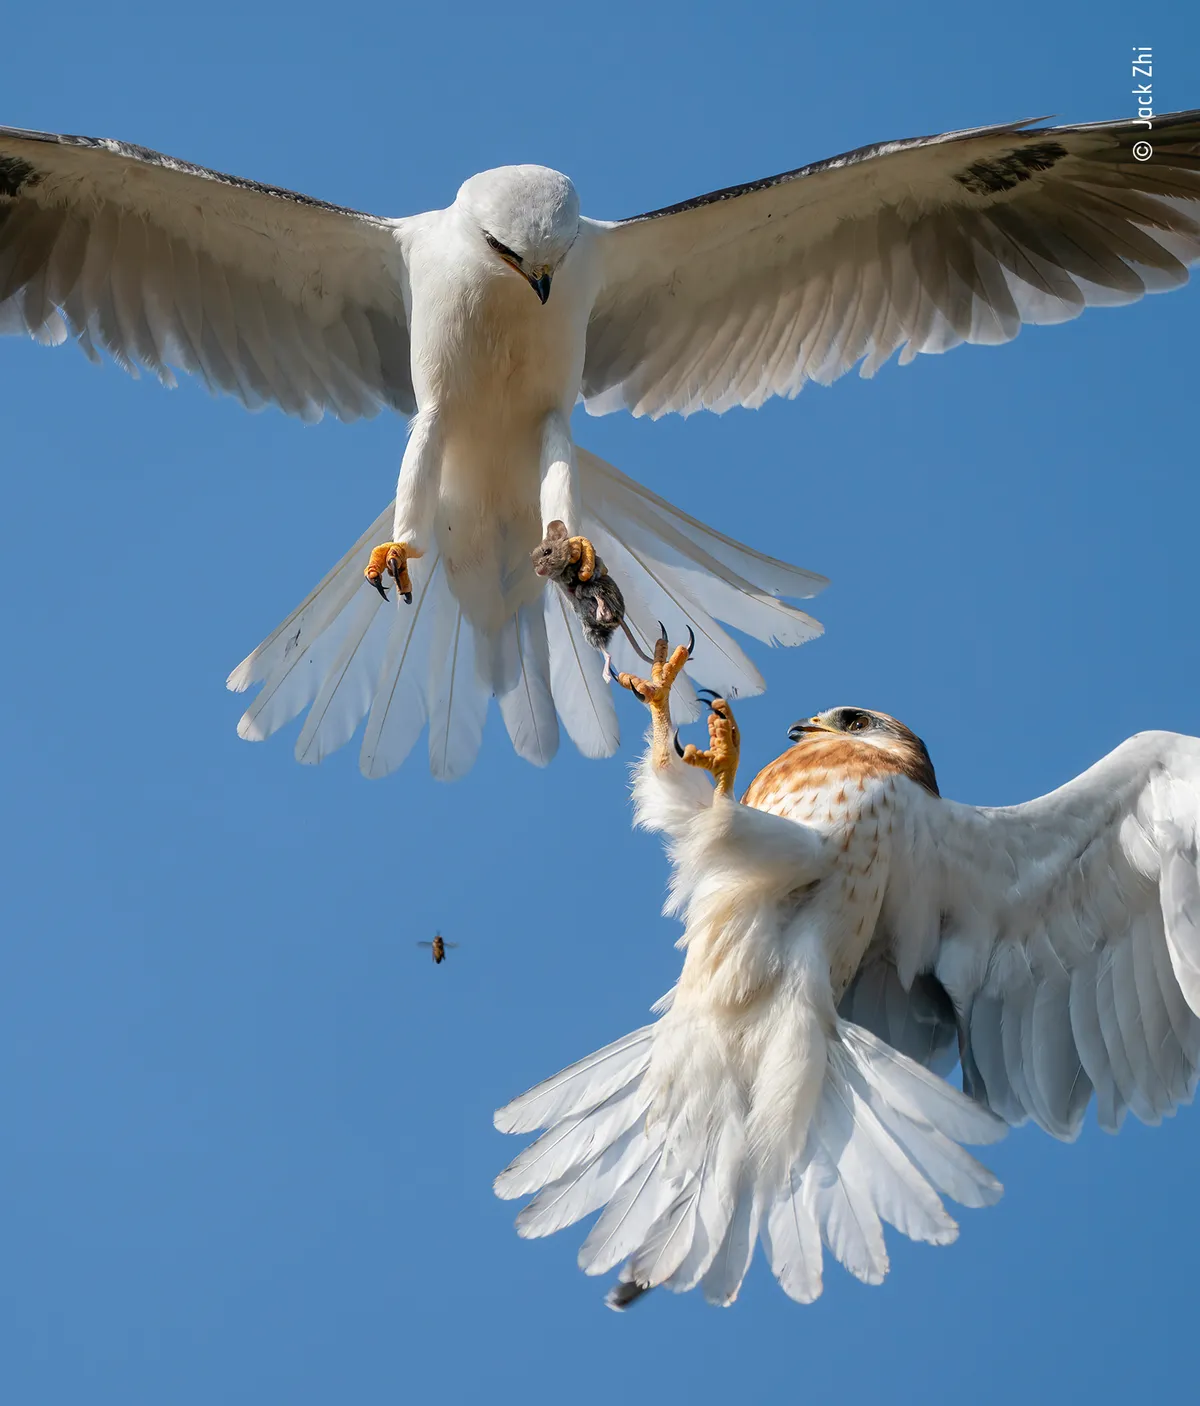 Category: Behaviour: Birds, Highly Commended. Up for grabs. © Jack Zhi (USA)/Wildlife Photographer of the Year